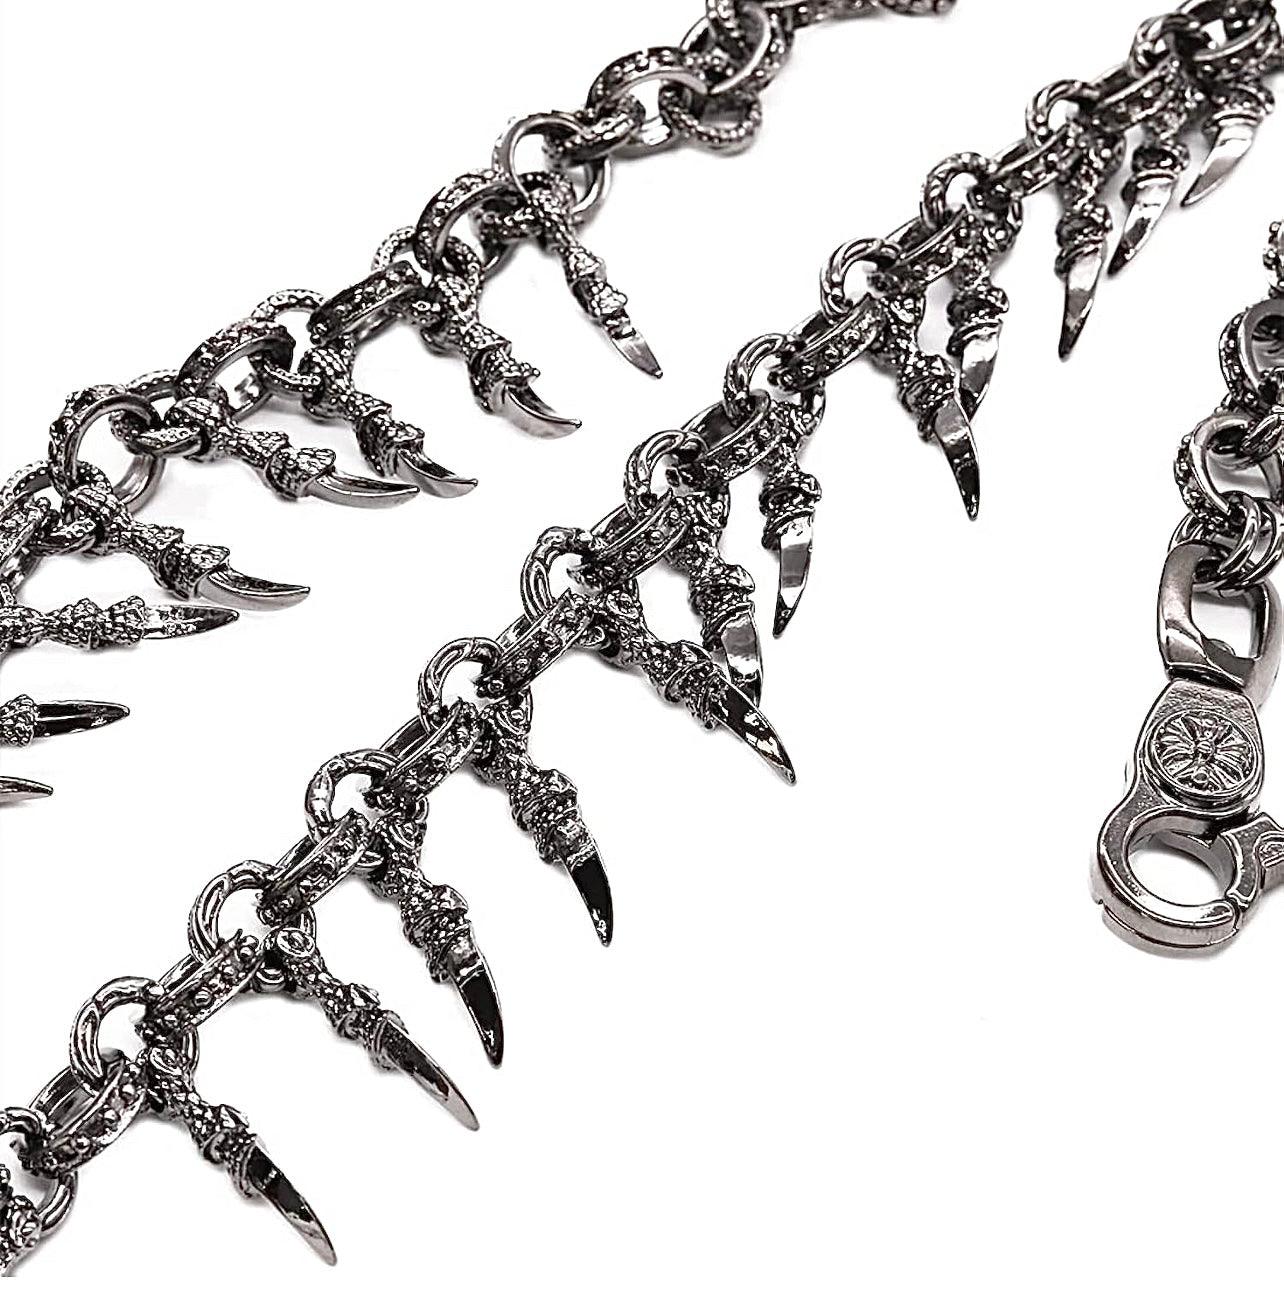 HANDMADE Medieval Dragon Claw Wallet Chain - Wicked Steel